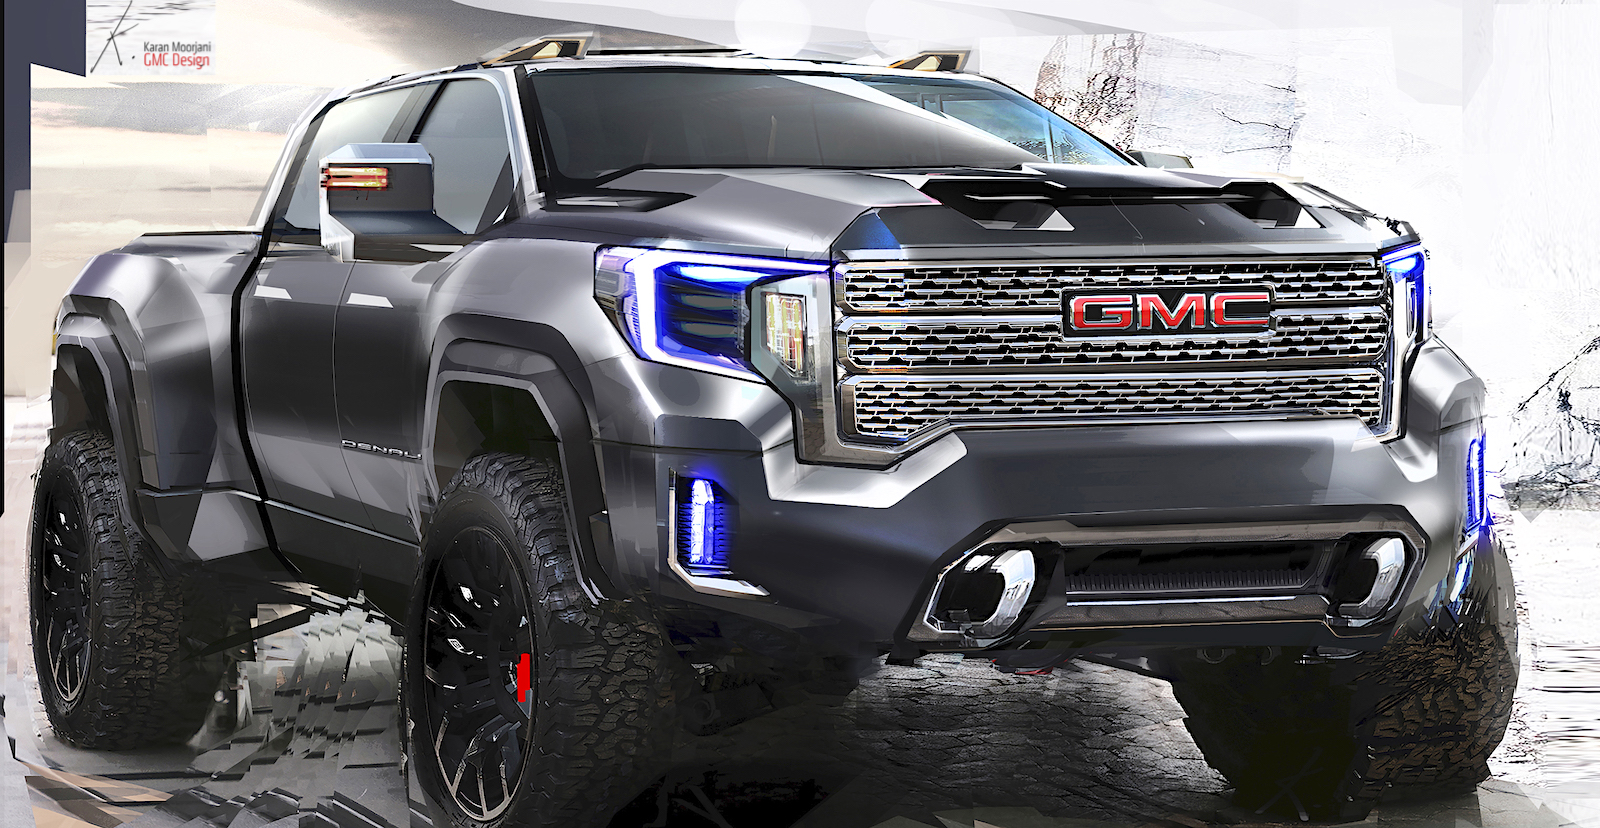 Report: GM Will Have an Electric Pickup Truck in 9 - This is a